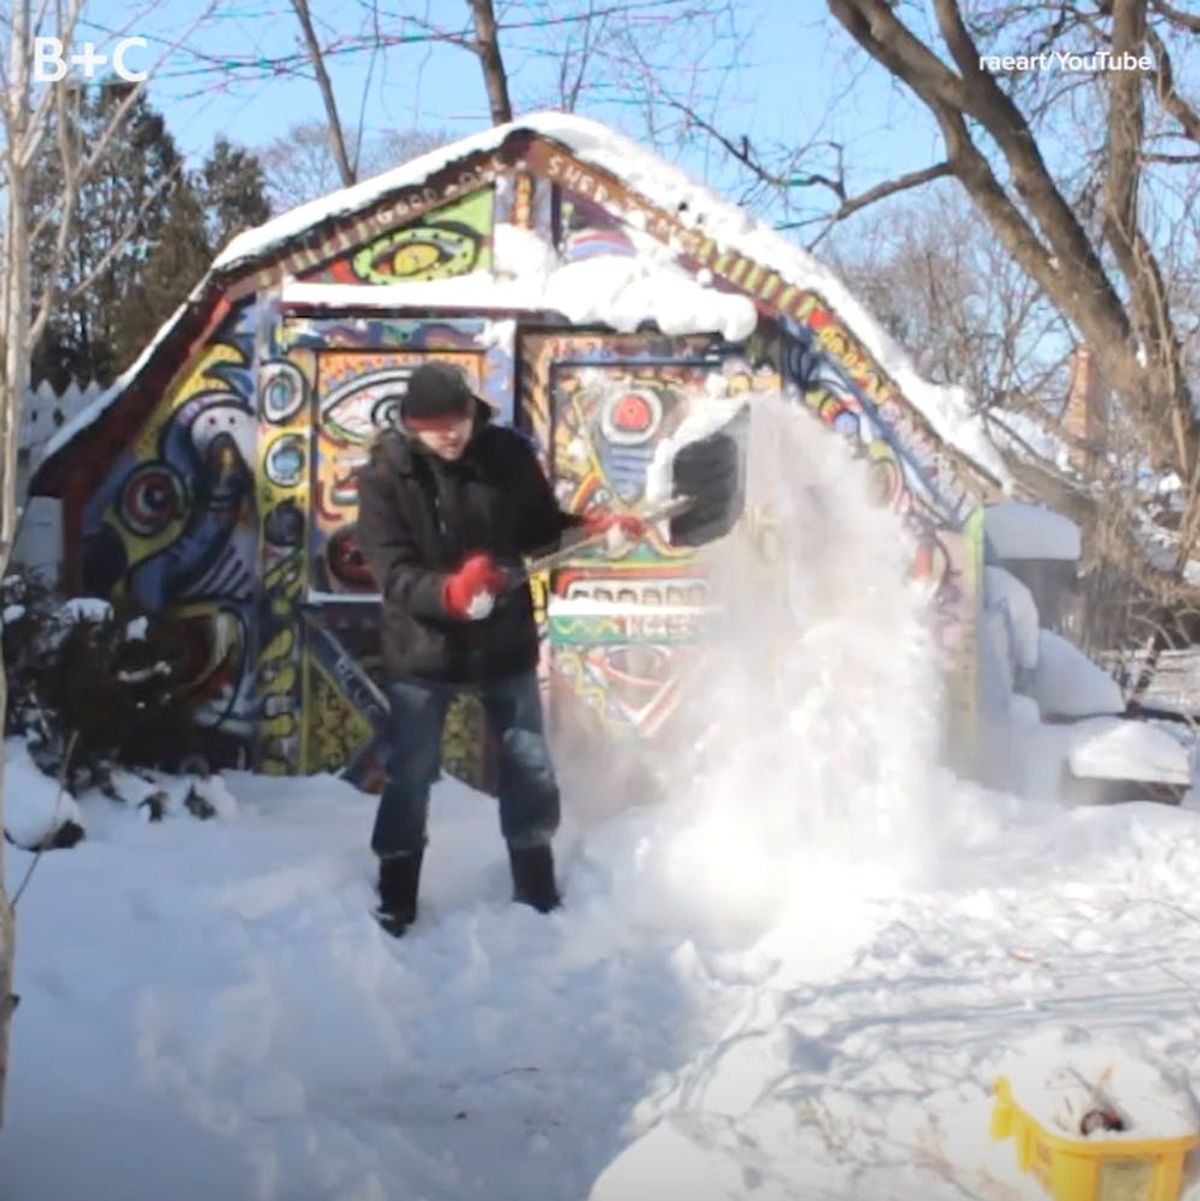 Shoveling Snow in Reverse Is the Coolest Thing You’ll See Today